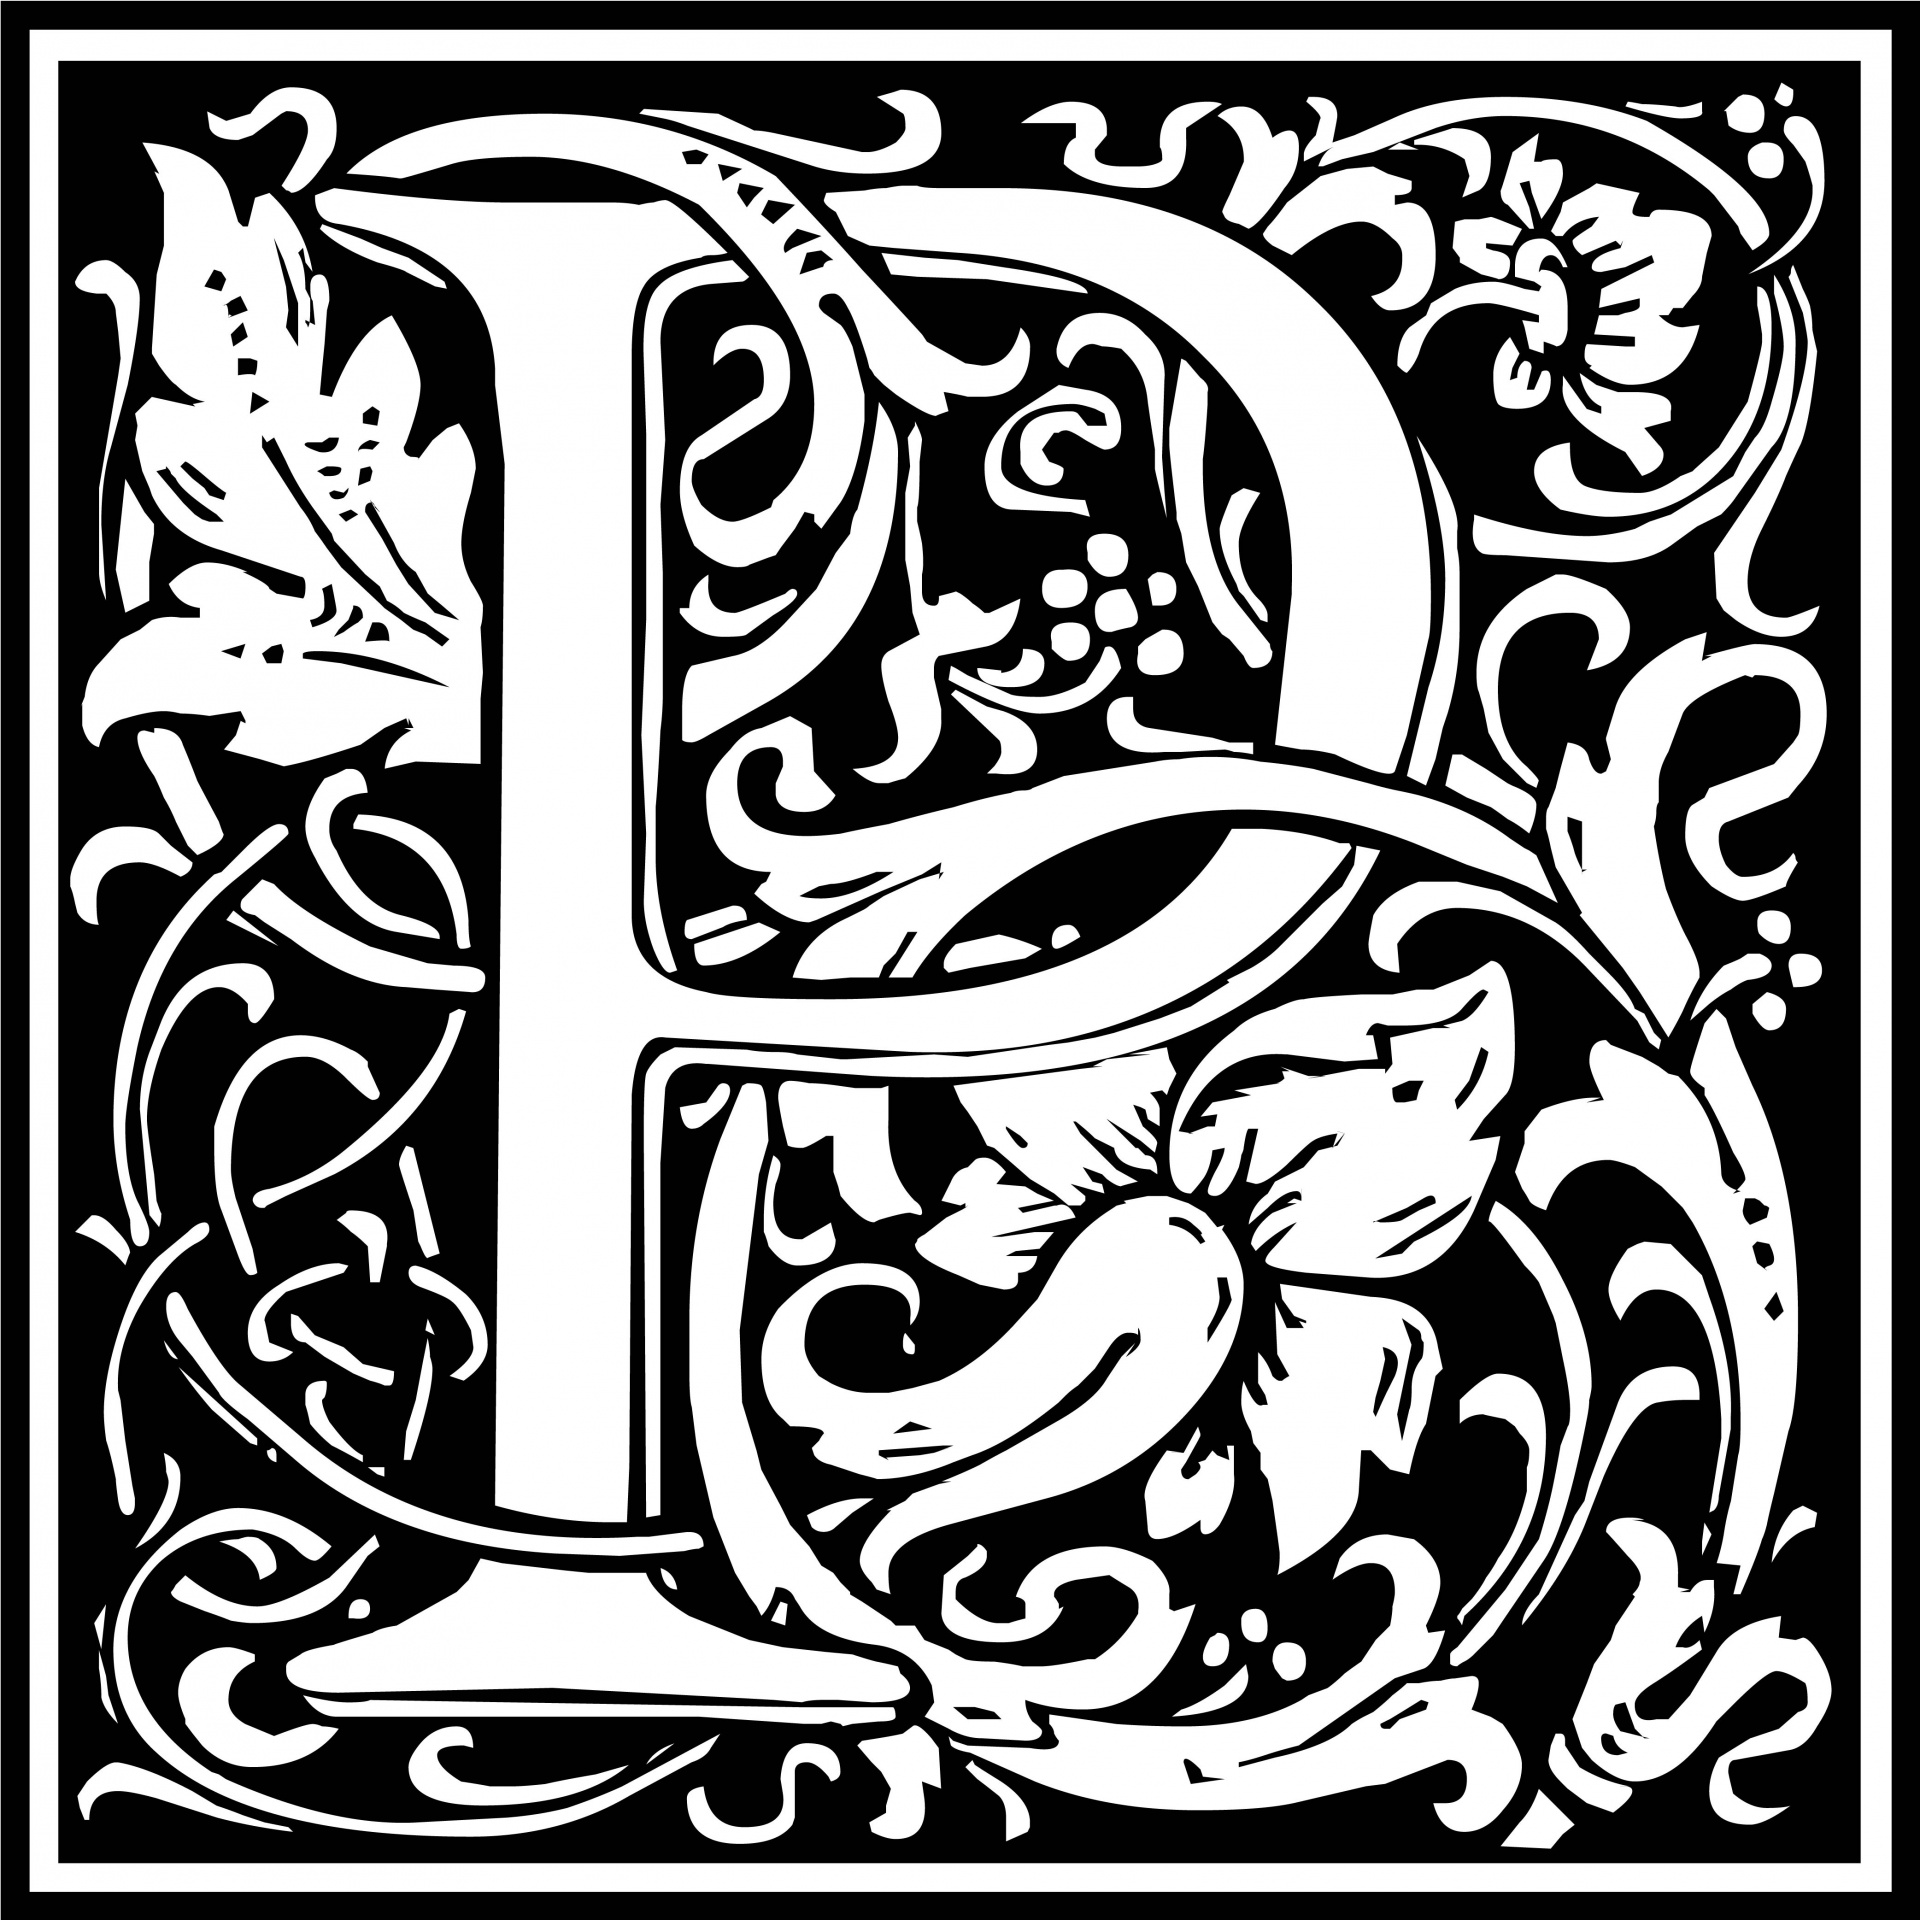 Black and white vector illustration of a retro, vintage style, floral alphabet letter initial P, after William Morris. Perfect for scrapbooking and other projects